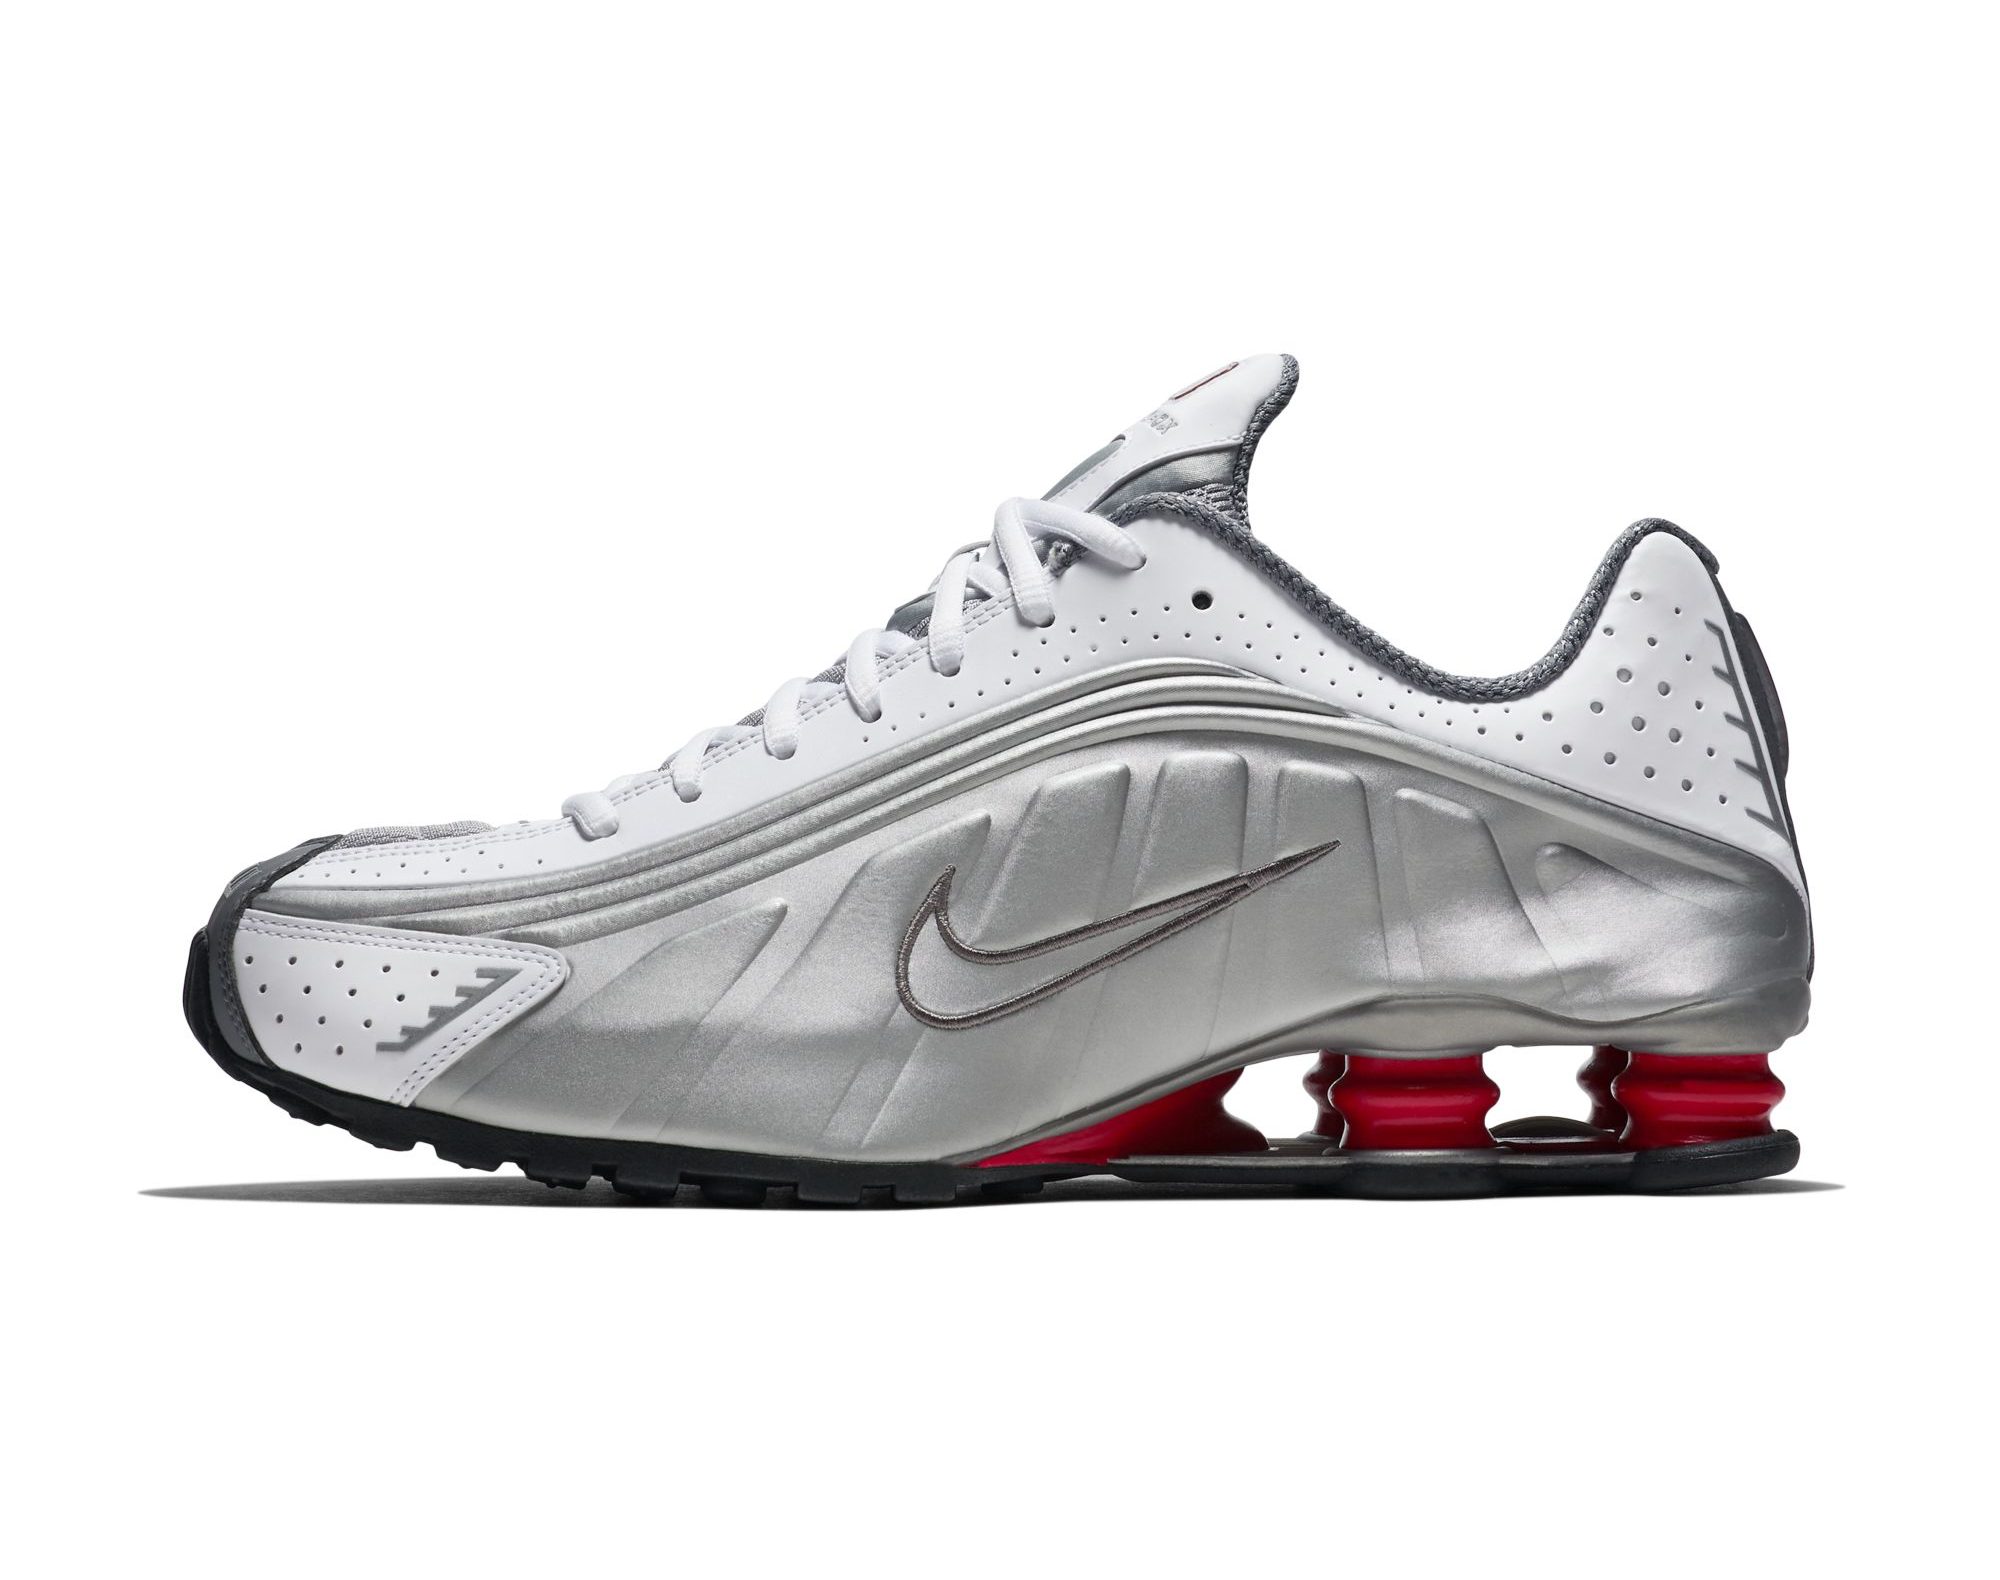 nike shox r4 2018 Archives - WearTesters